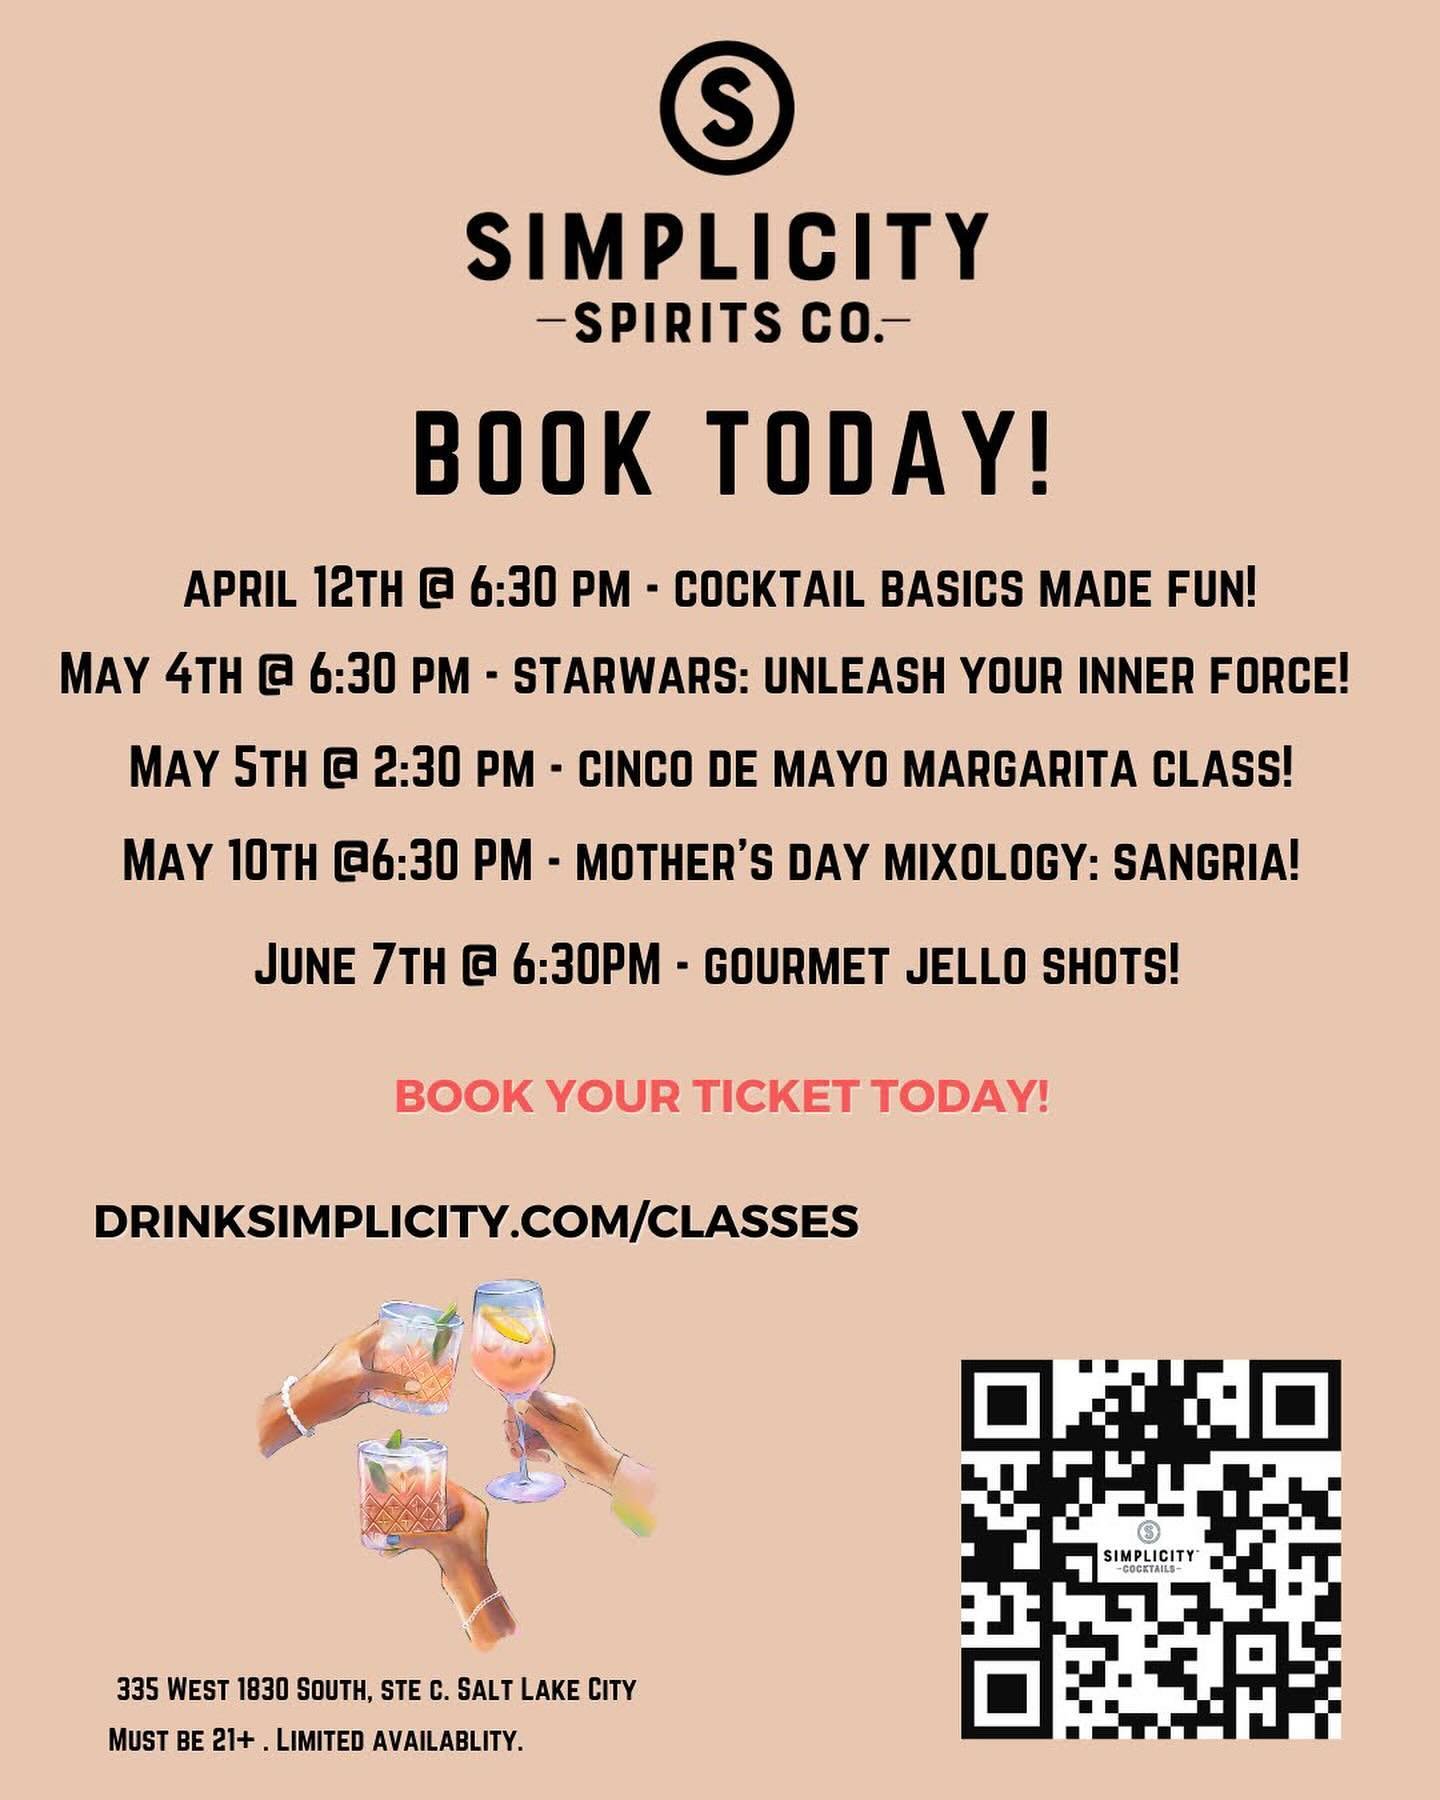 Starting with this Friday&rsquo;s Mix and Mingle, we&rsquo;ve got a fun and exciting schedule of classes set up for y&rsquo;all! Booking is available on the website! 🎊